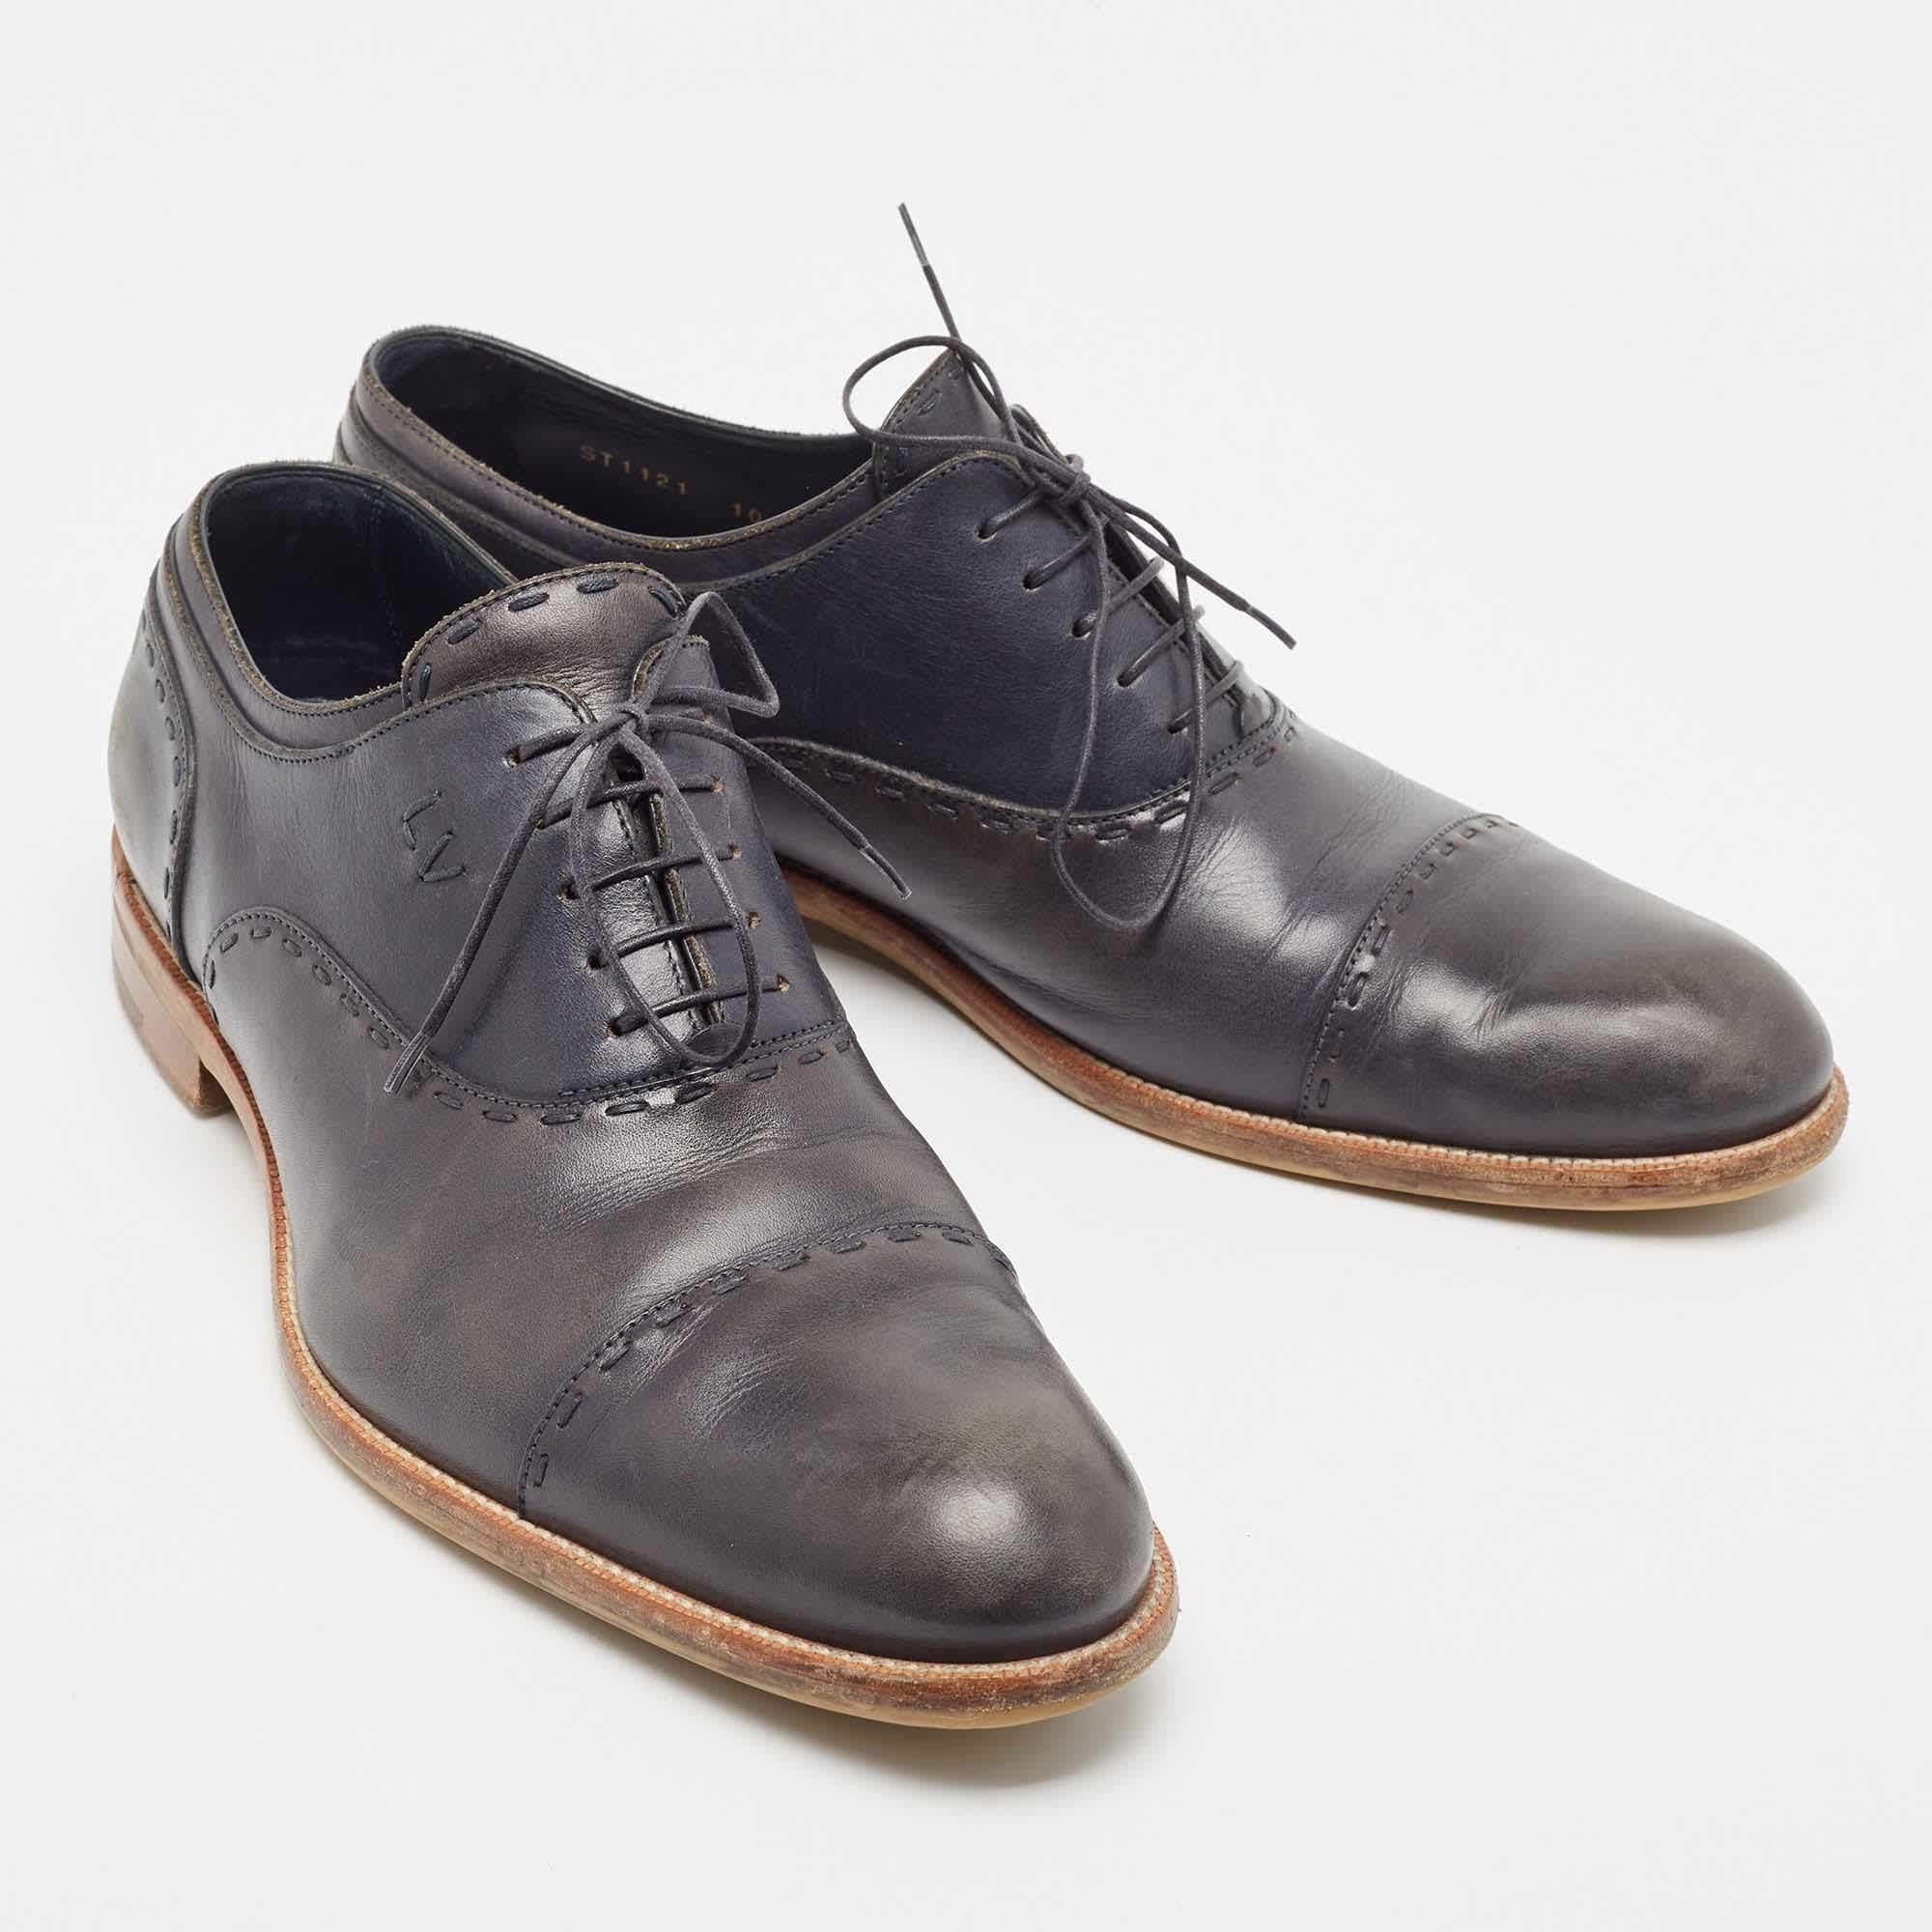 Let comfort and classic style be yours with these designer oxfords from Louis Vuitton. Crafted with skill, the high-quality shoes have the perfect construction to take you through the day with utmost ease.

